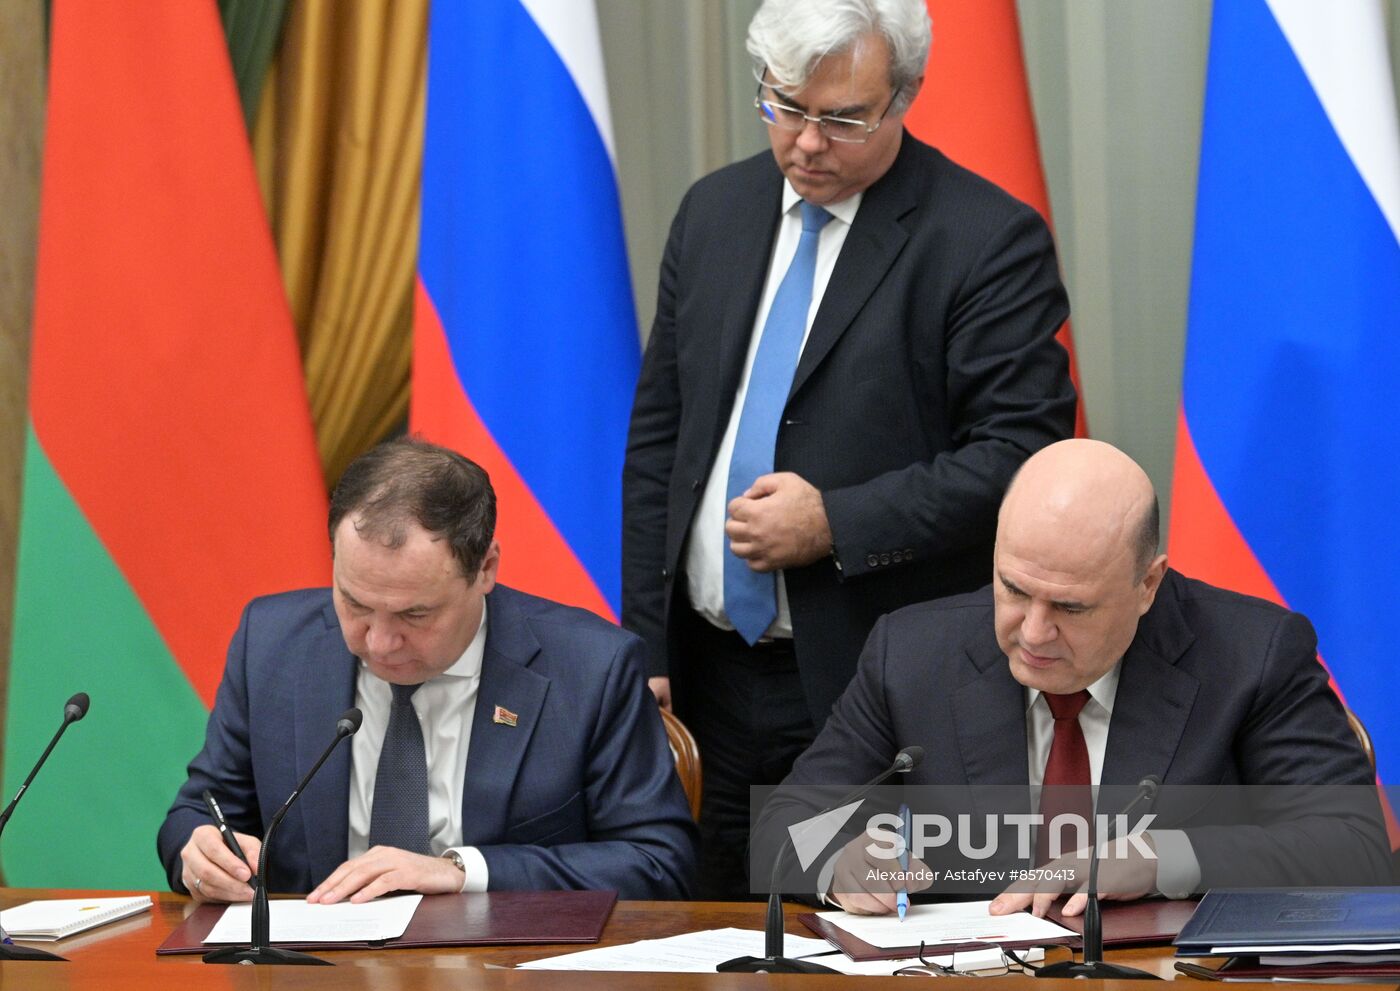 Russia Belarus Union State Ministers Council